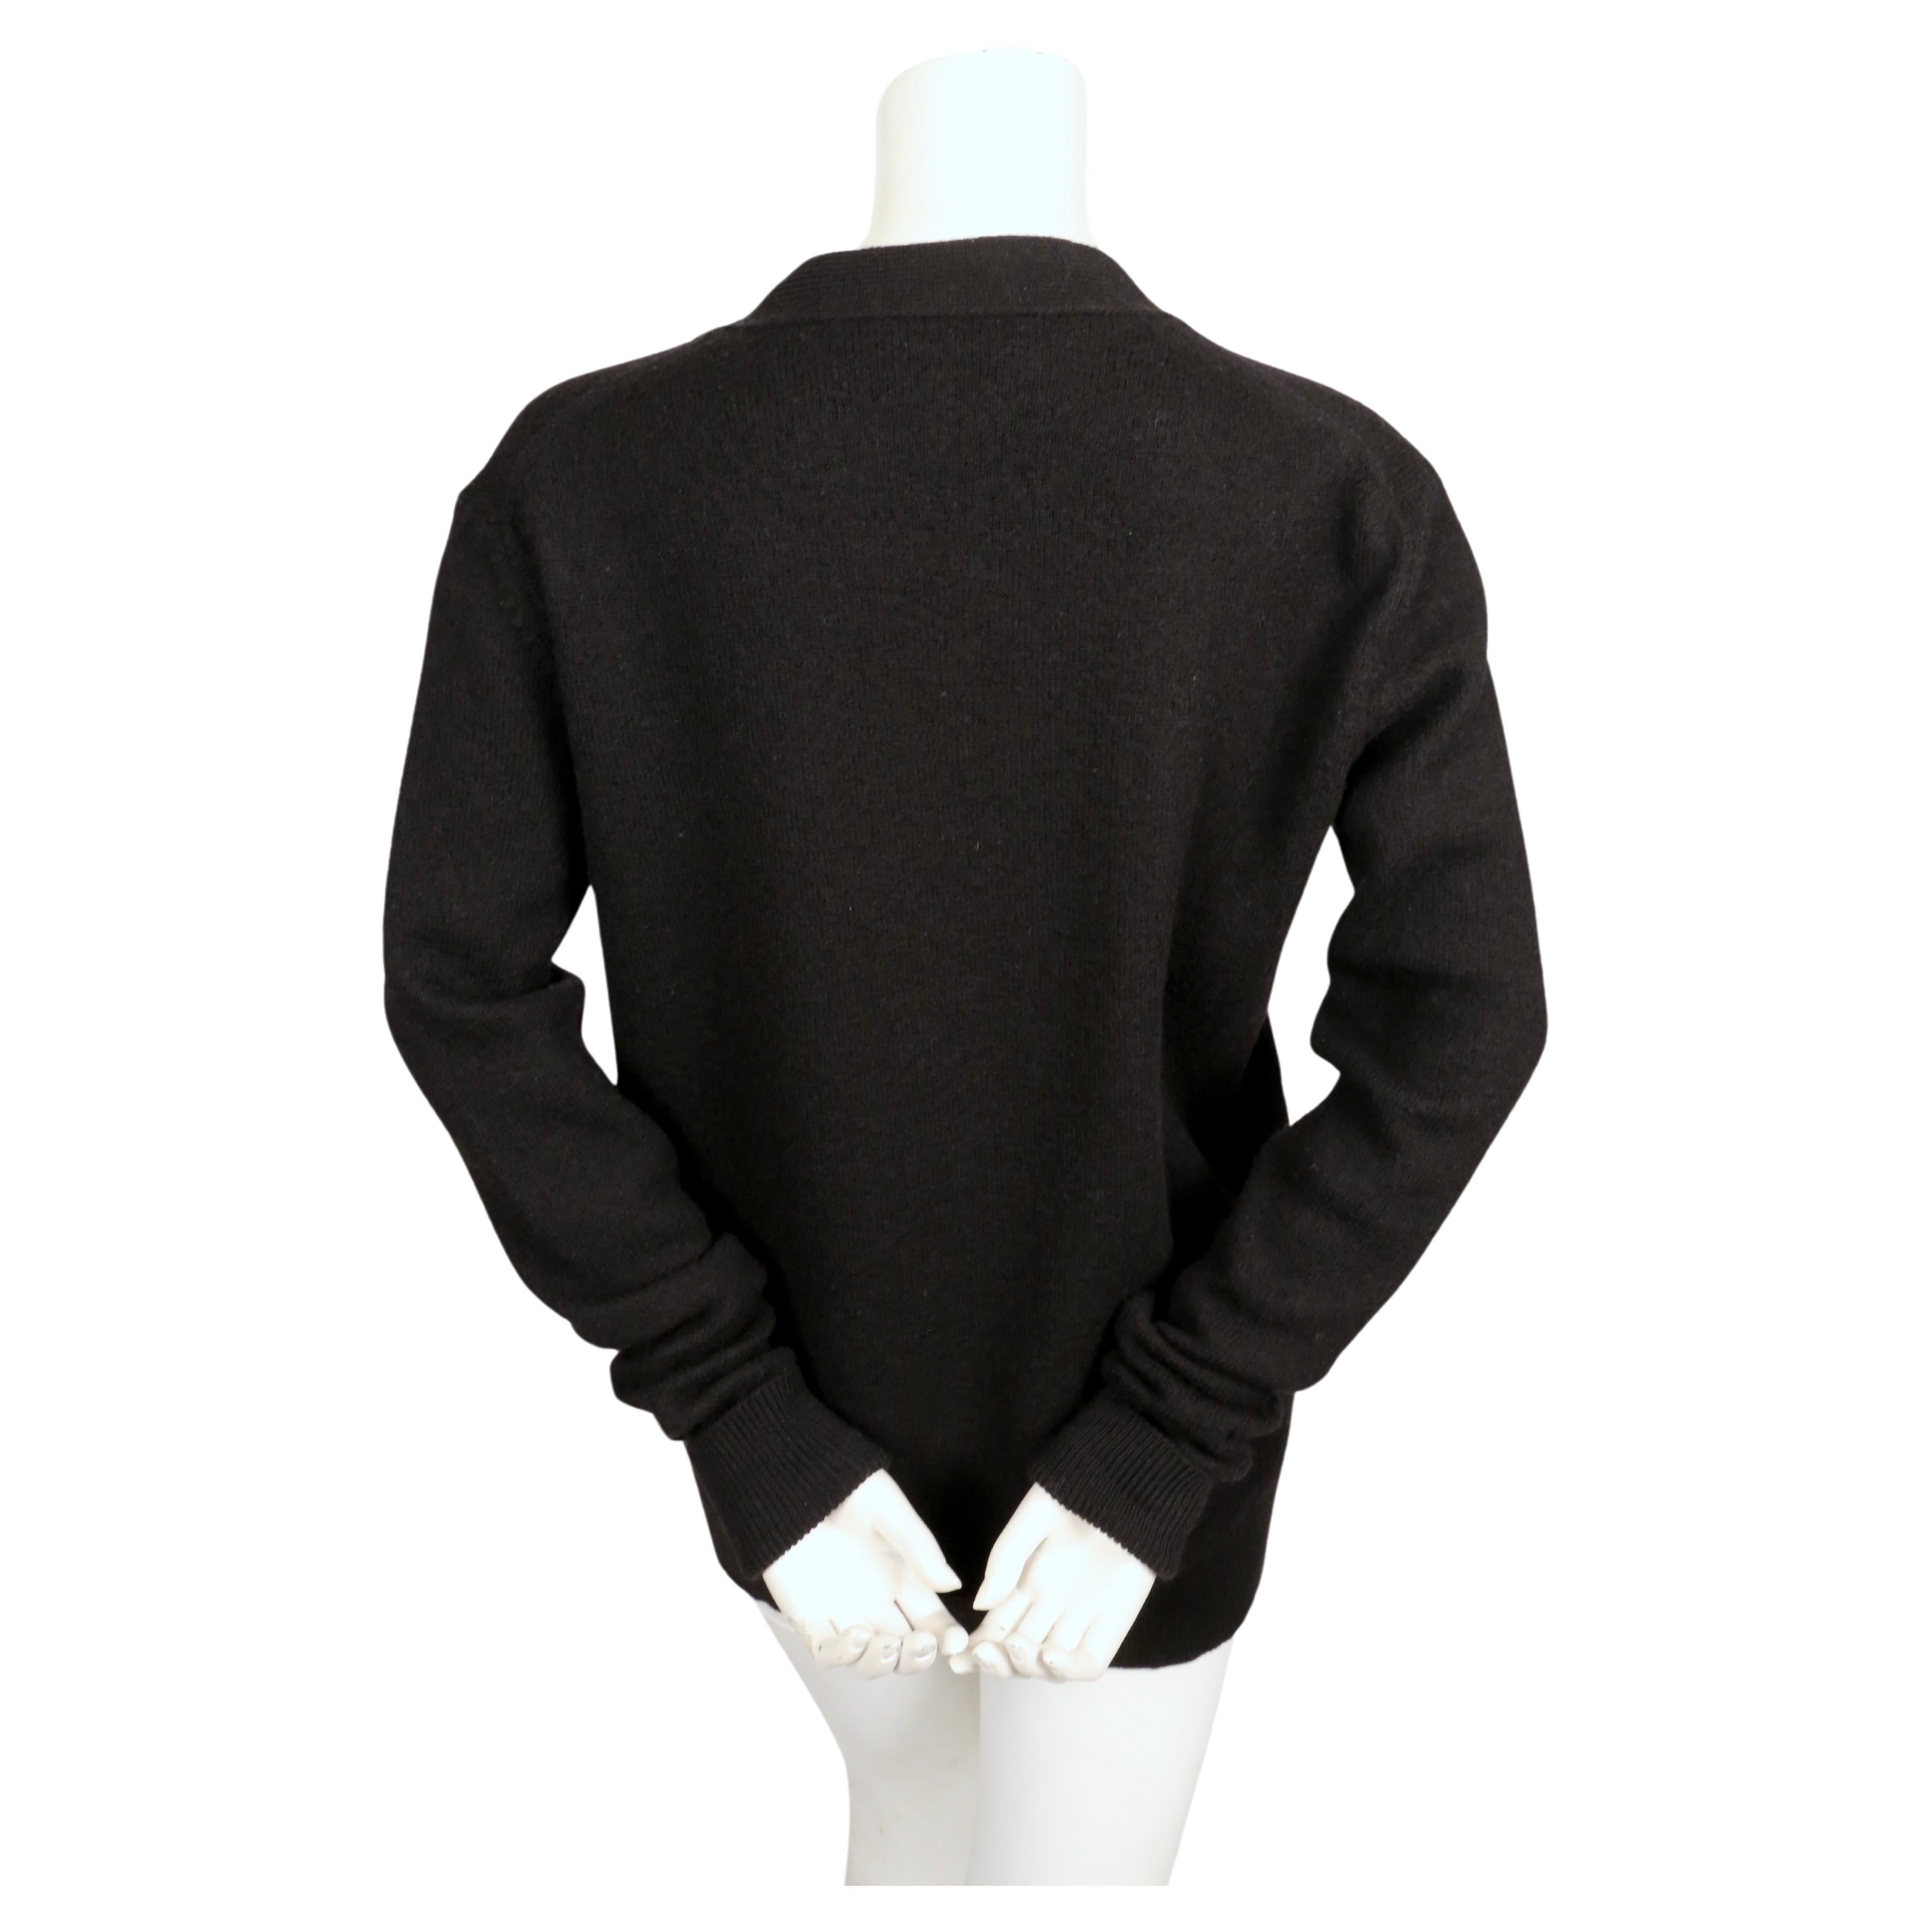 CELINE by PHOEBE PHILO black boucle knit cardigan with red buttons For Sale 1